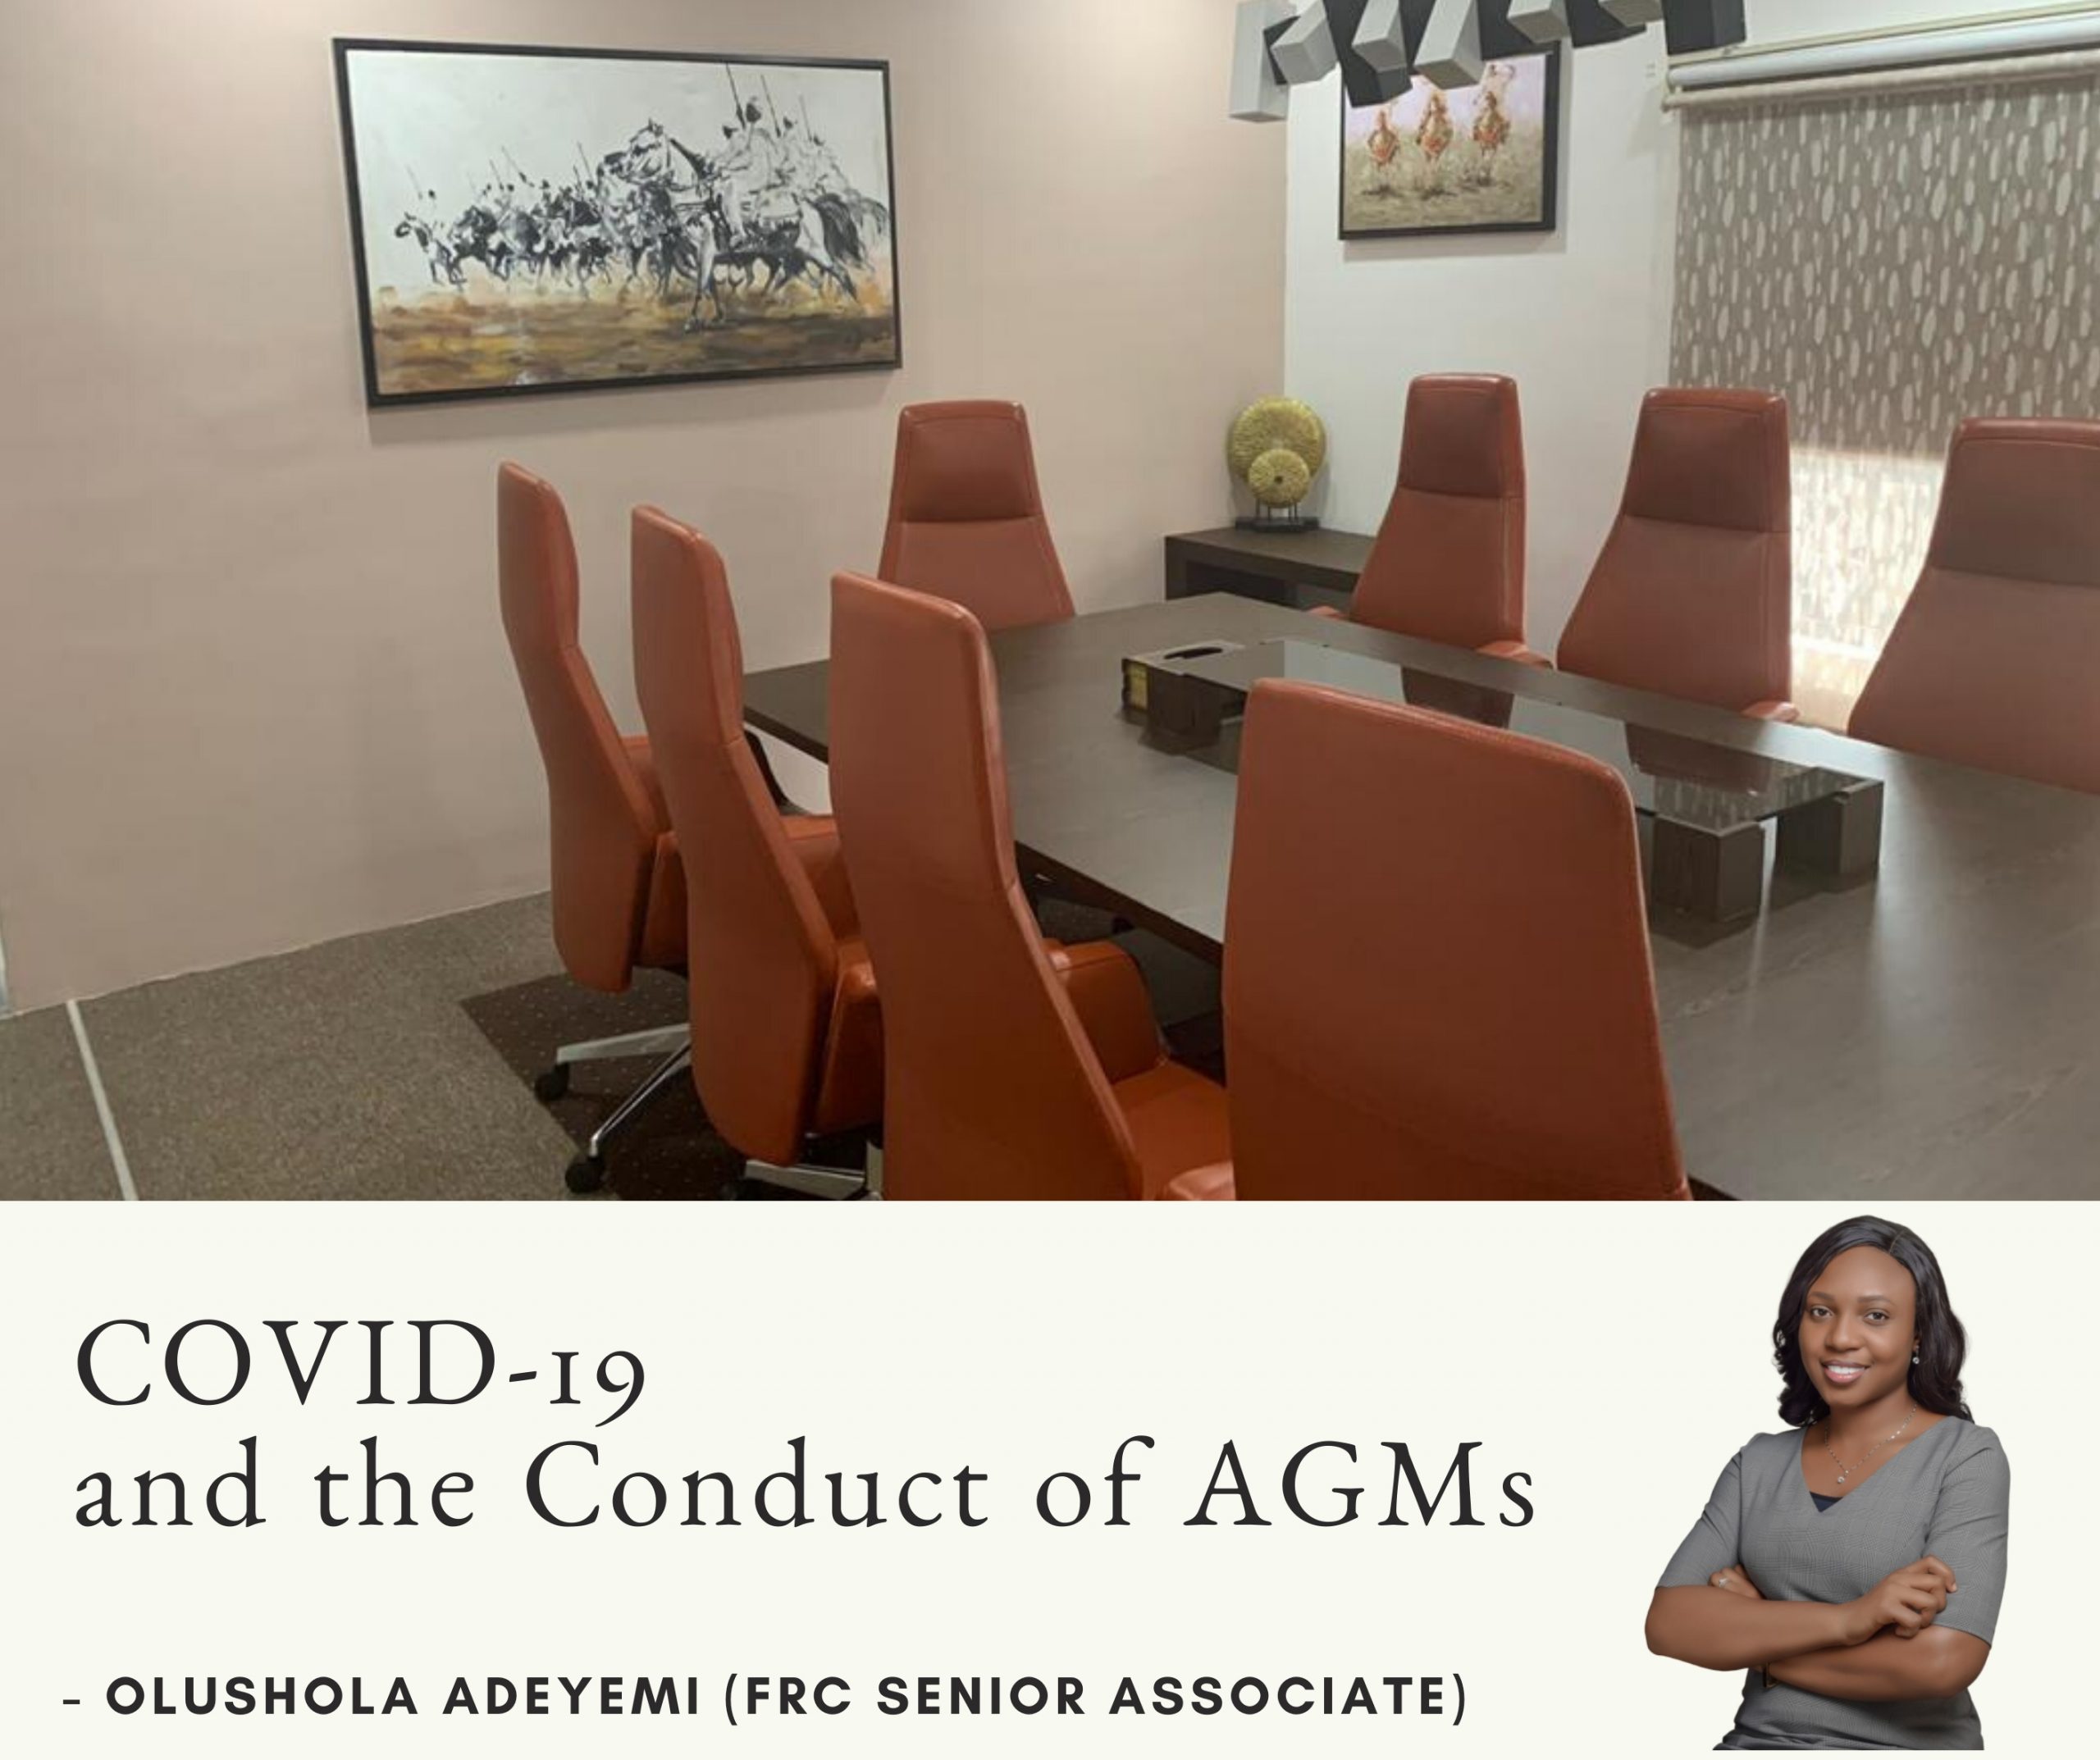 COVID-19 and the Conduct of AGMs